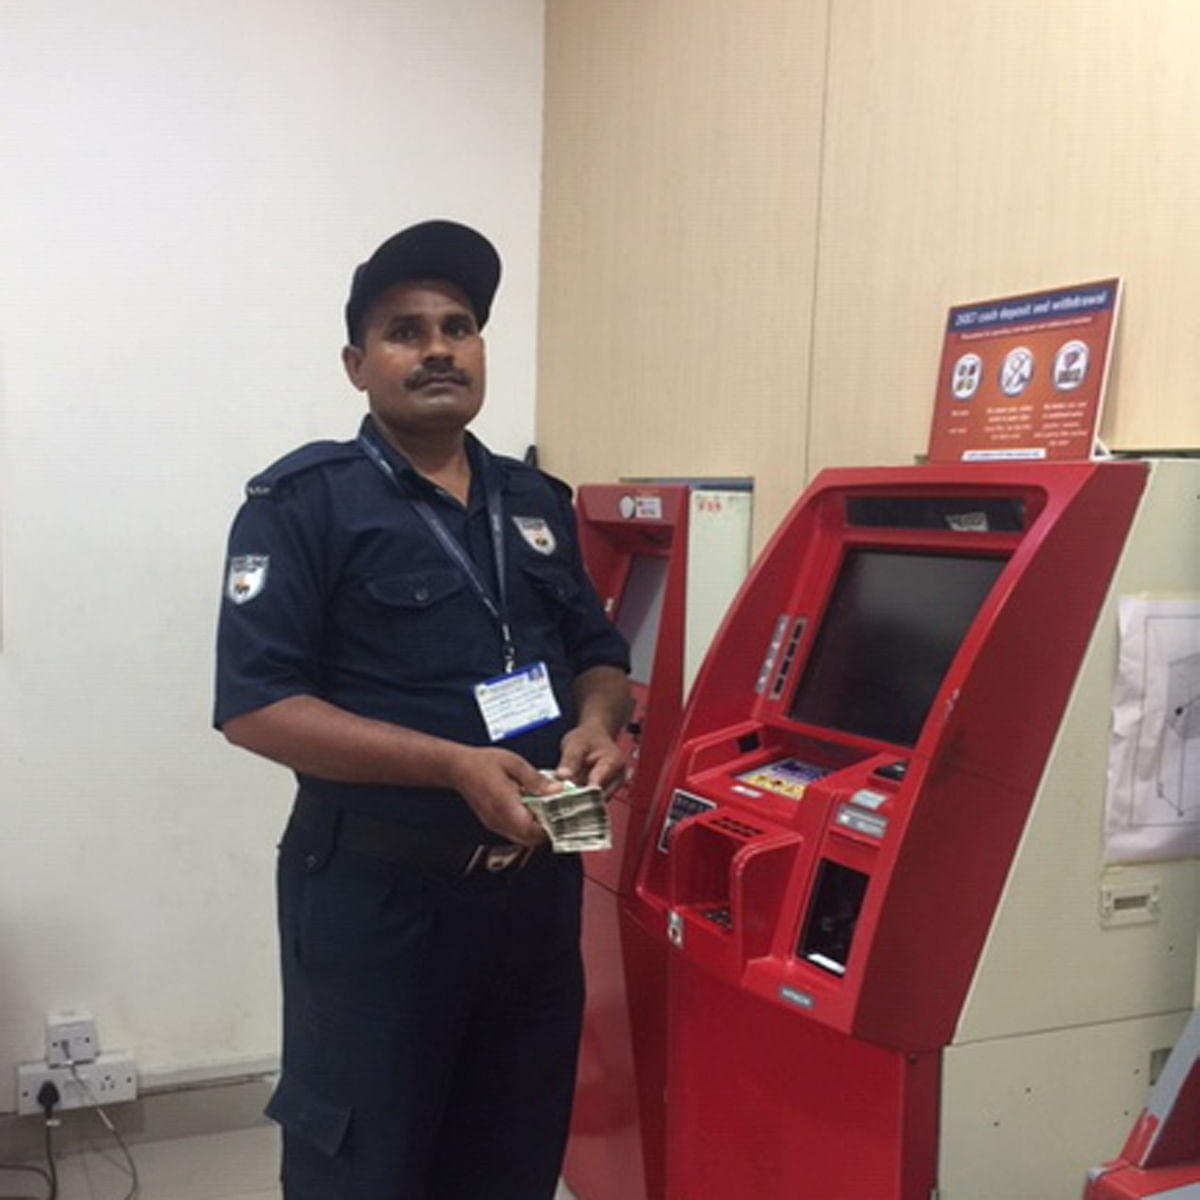 The security guard of the ATM Seshnath Yadav. (DH photo)